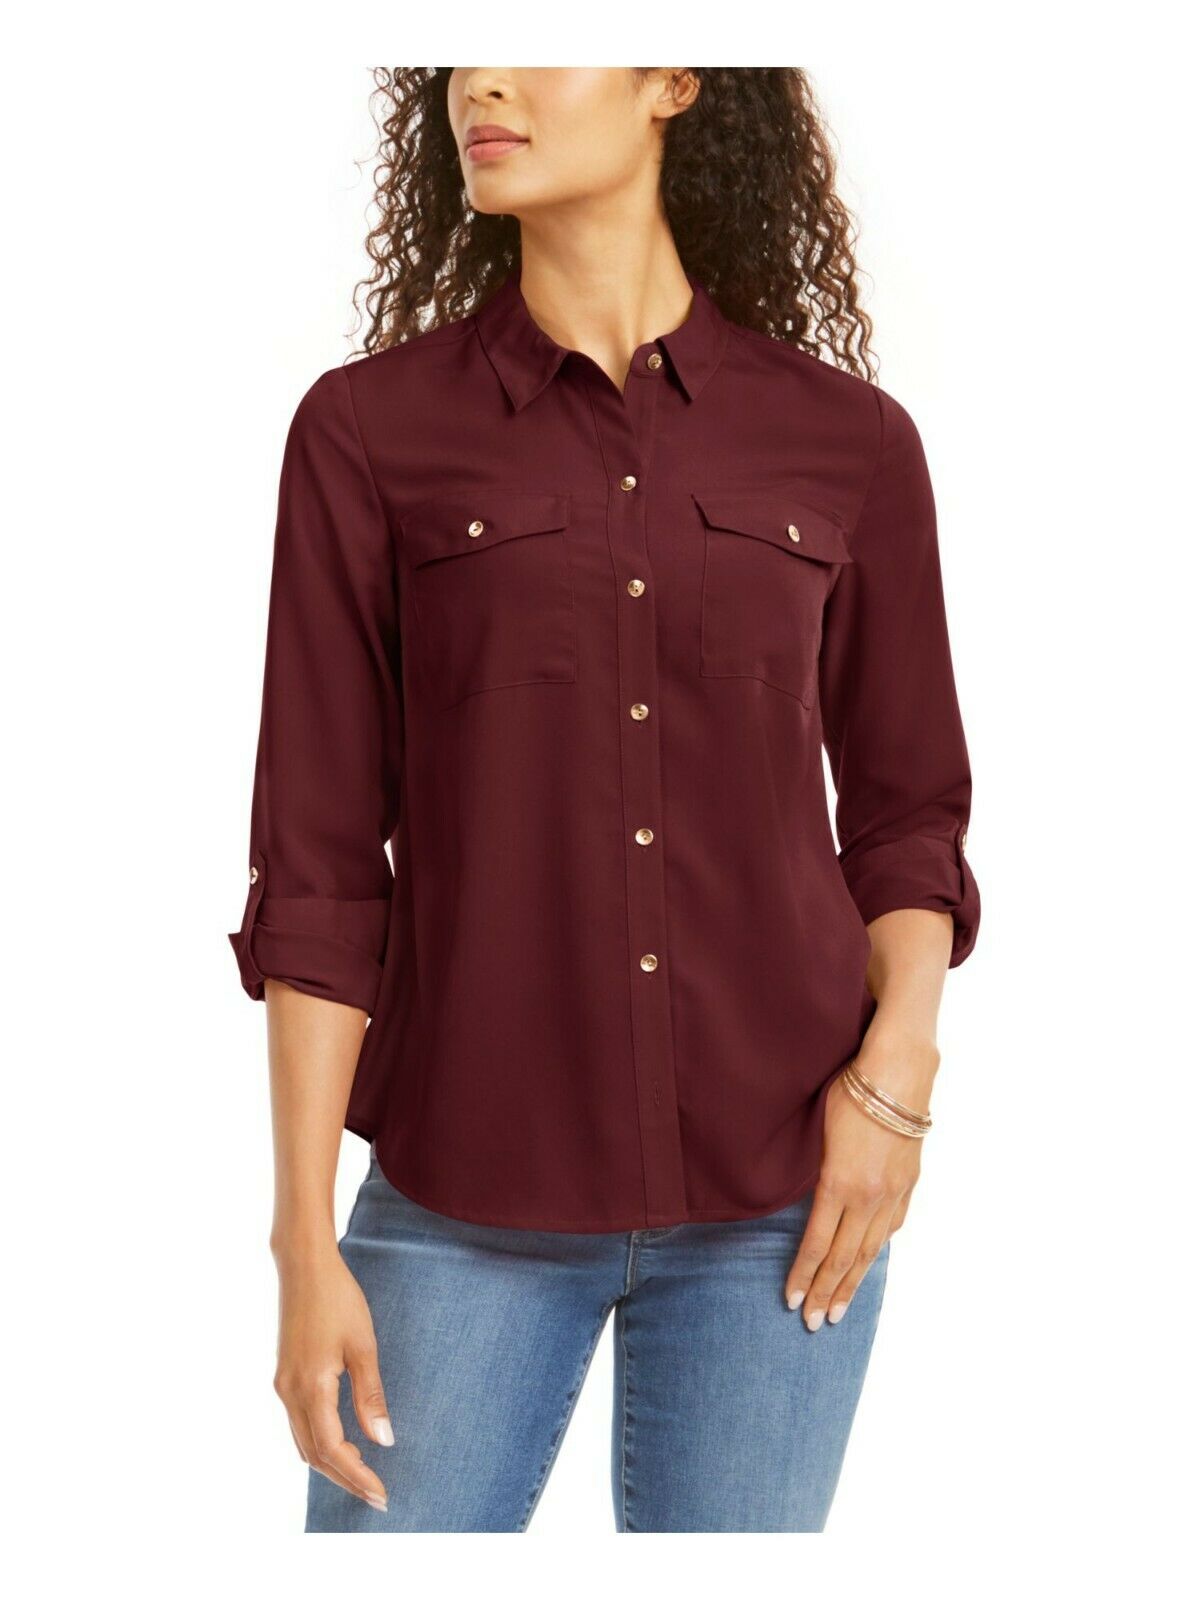 Charter Club Women's Burgundy Long Sleeve Collared Button Up Top - Easy Shopping Center